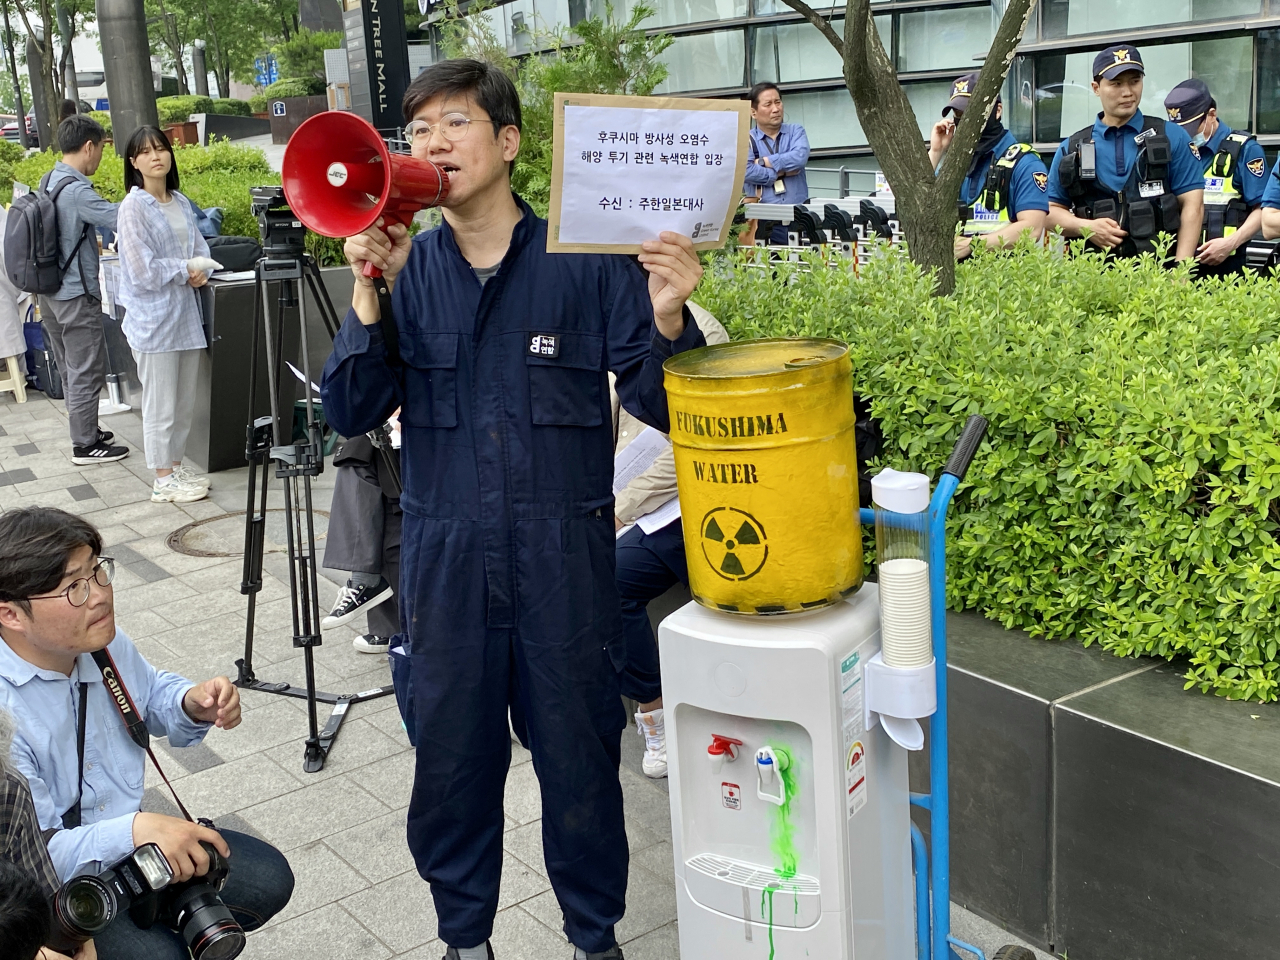 An activist from the environmental group Green Korea United staged a protest in front of the Embassy of Japan in Seoul, standing next to a water purifier attached to a mock barrel of contaminated Fukushima wastewater on June 7, 2023. (Herald DB)